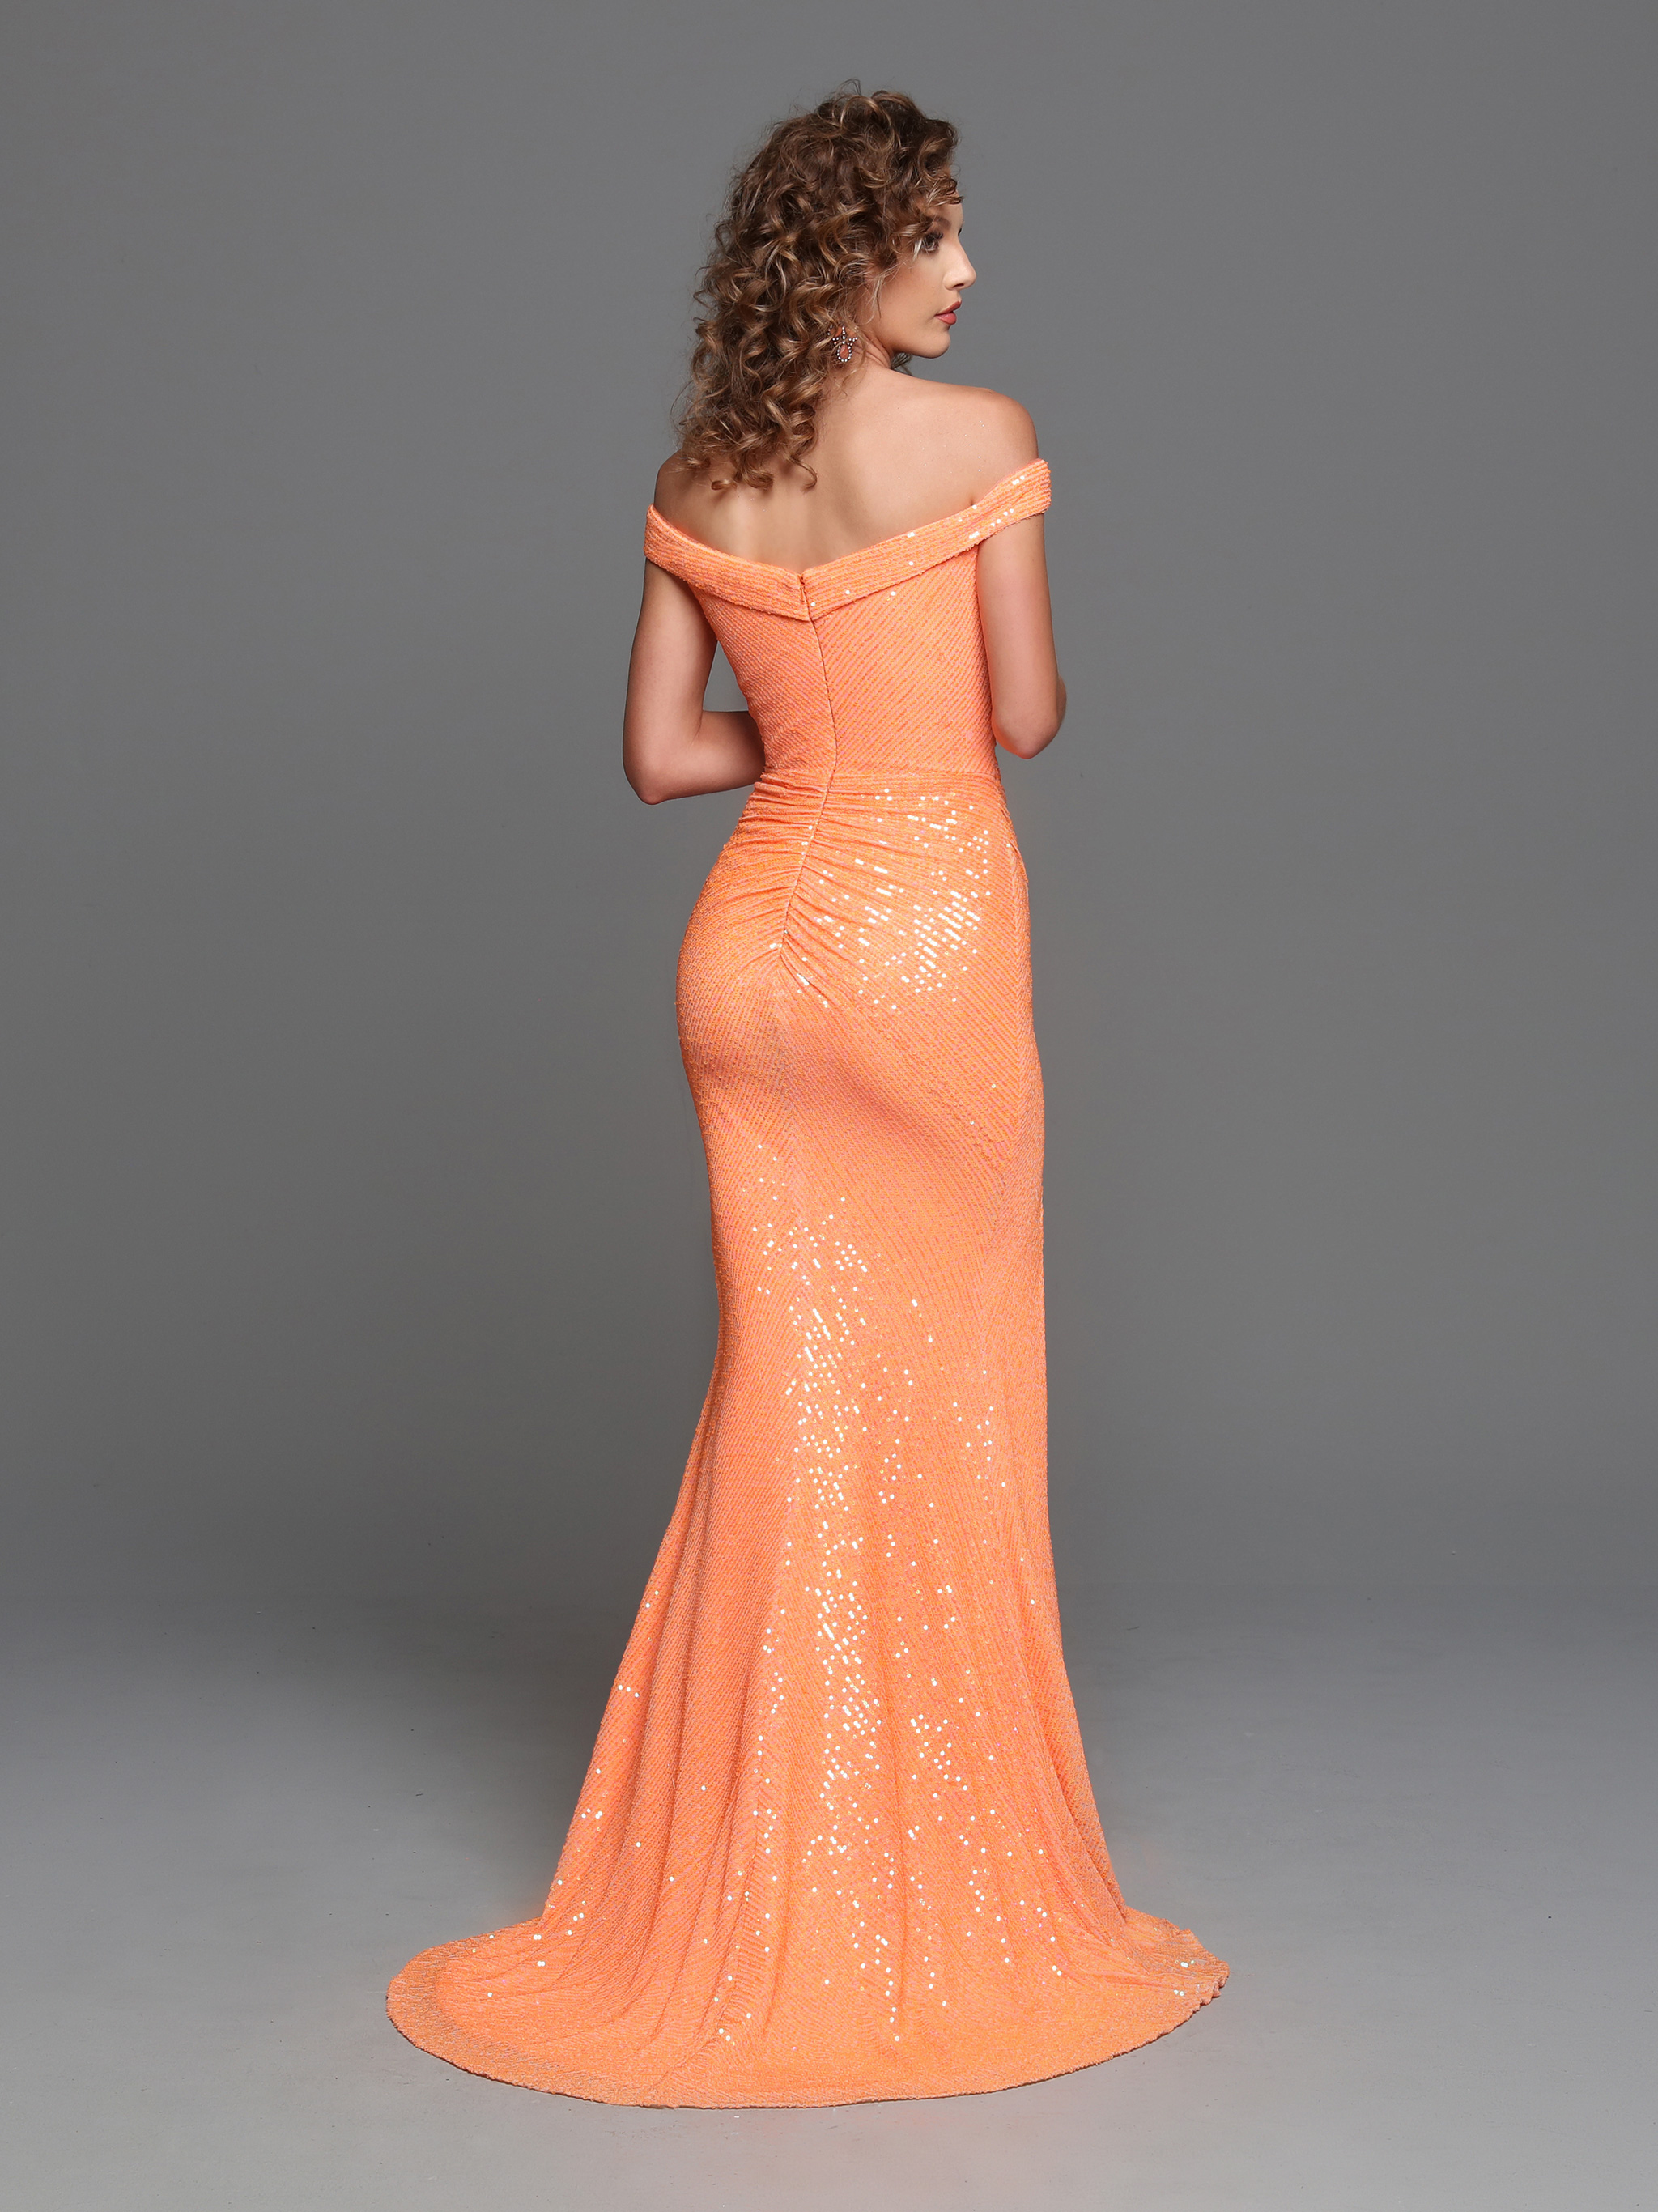 Image showing back view of style #72283